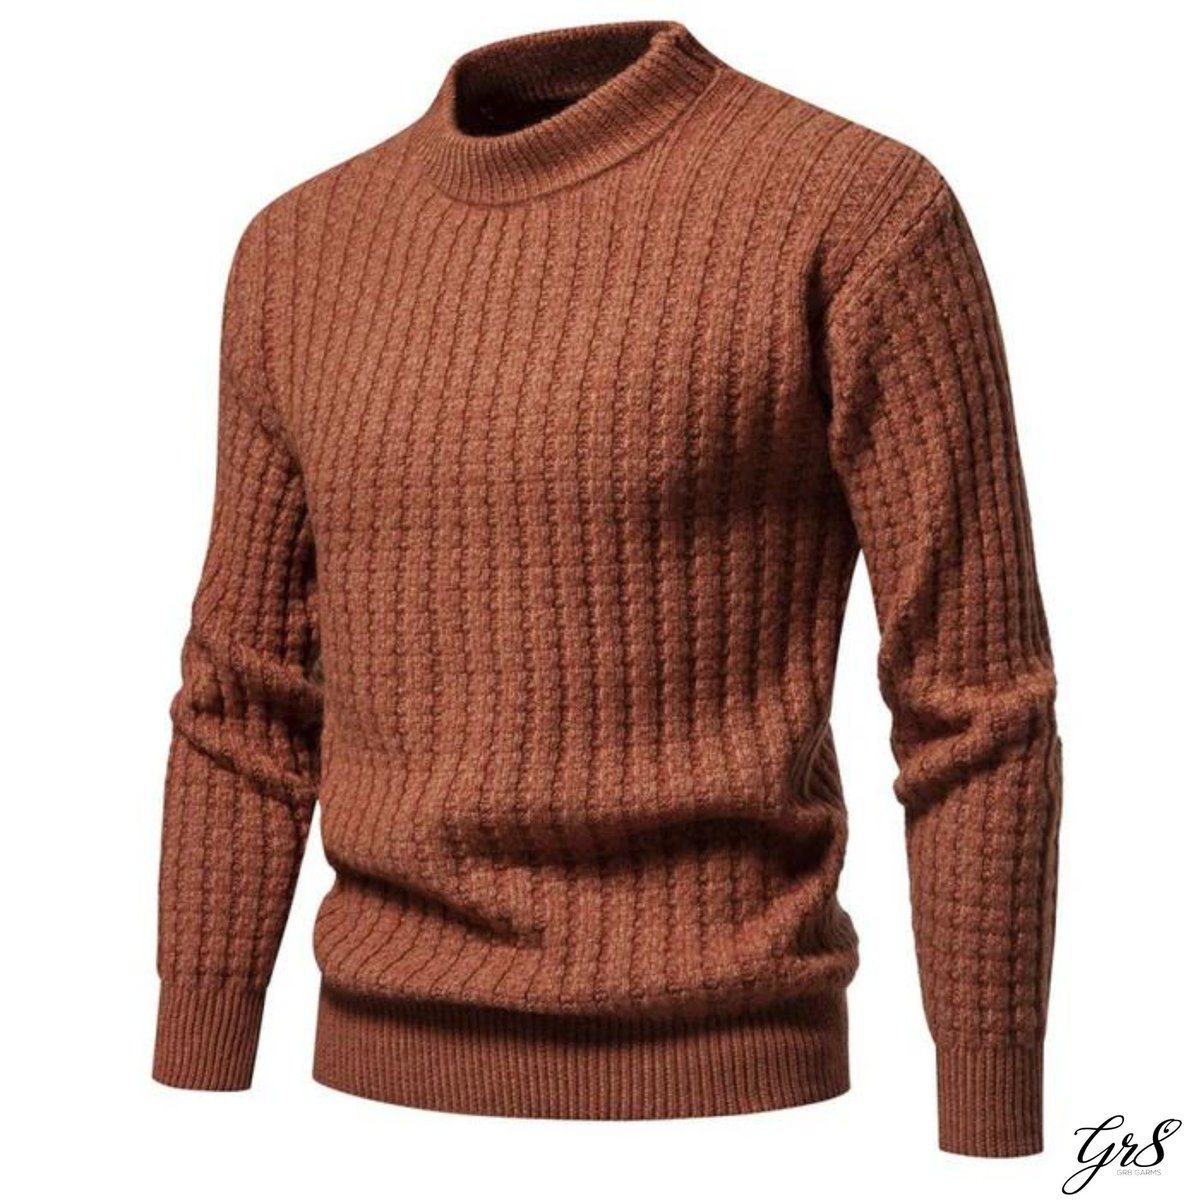 Crafted from premium materials, our men's jumpers offer warmth and style for those breezy days 🌟

#springstyle #springfashion #BeGr8 #LookGr8 #FeelGr8 #LiveGr8 #Fashion #FashionTrends #Clothing #WomensClothing #MensClothing #KidsClothing #OOTD #WomensFashion #FashionBrand